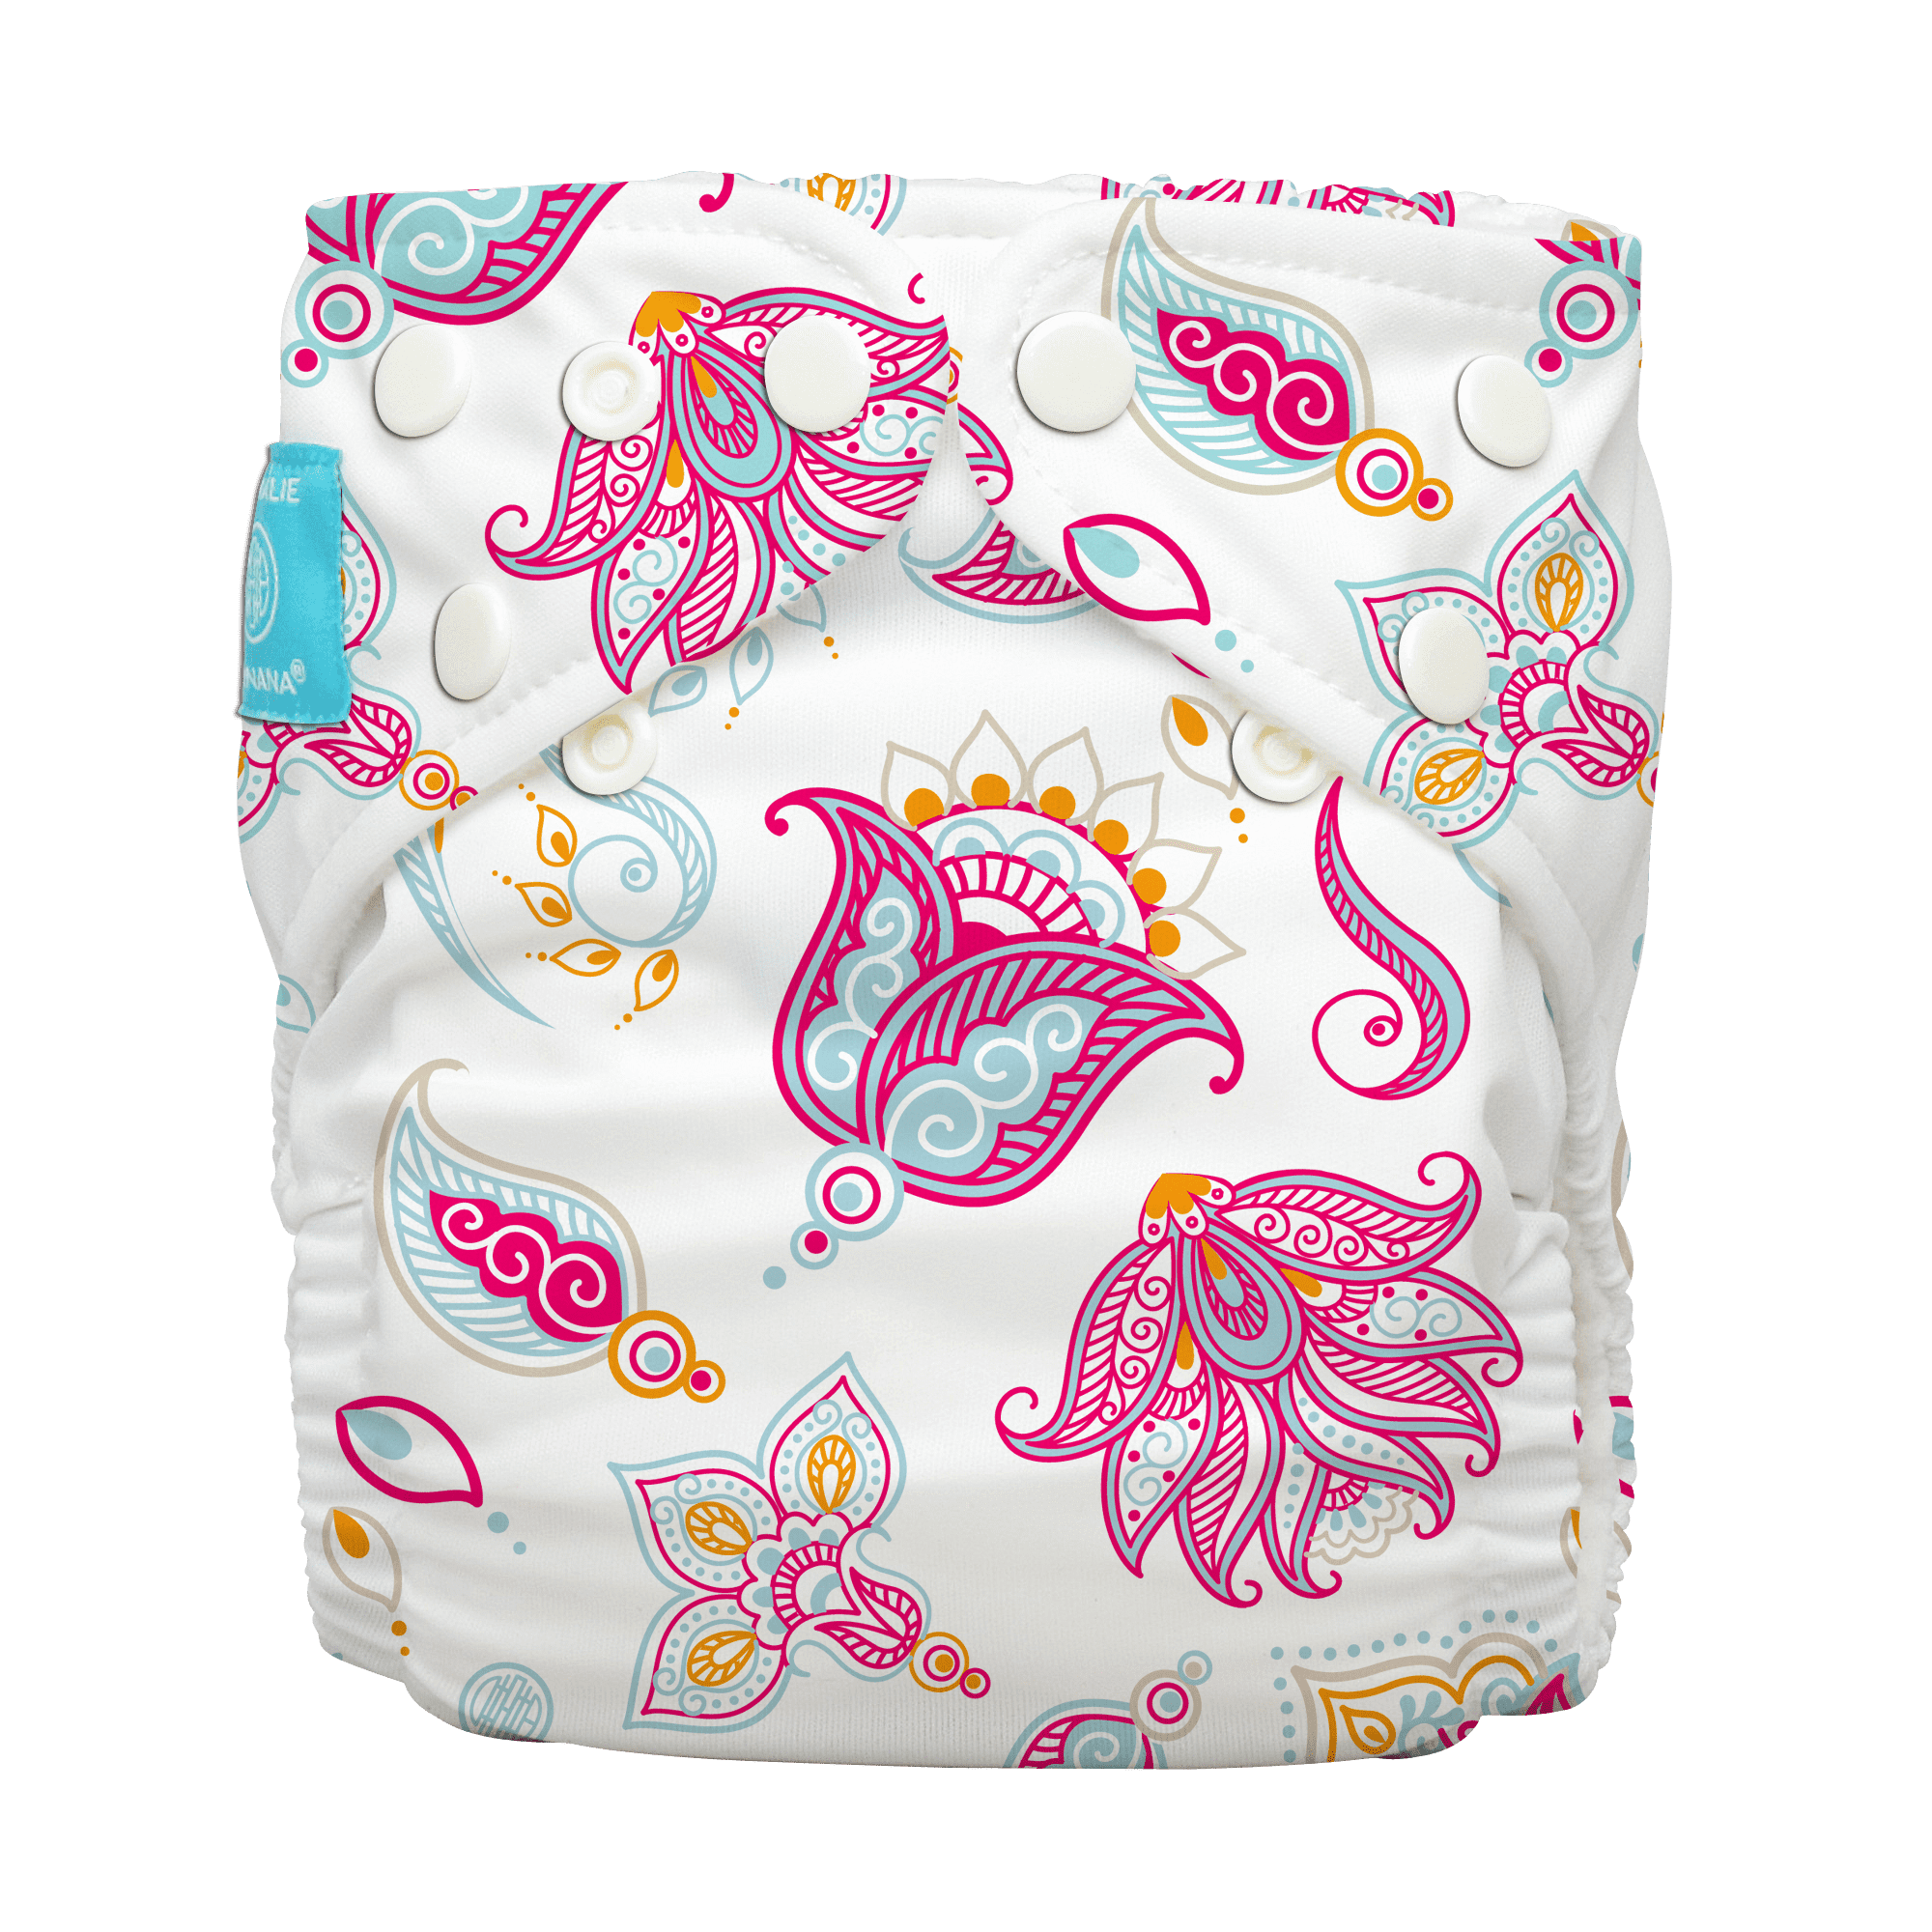 REUSABLE MULTIUSE WET BAG FOR CLOTH NAPPY/DIAPER SWIMMERS PINK MERMAIDS 